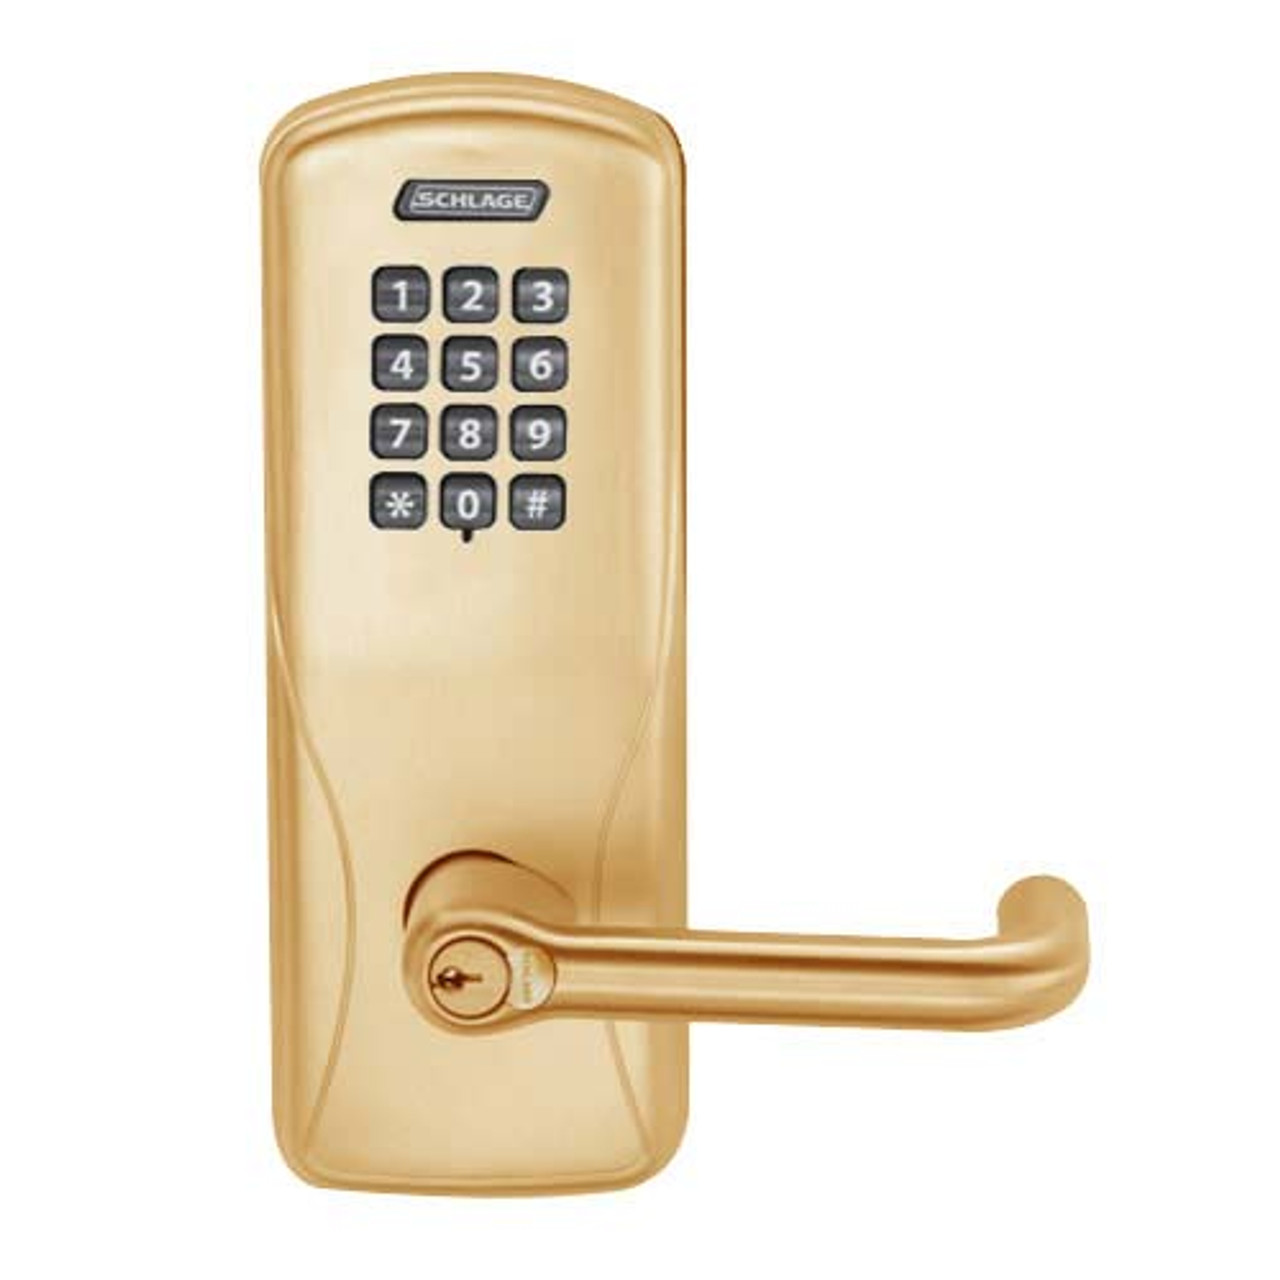 CO100-MS-70-KP-TLR-GD-29R-612 Schlage Standalone Mortise Electronic Keypad locks in Satin Bronze